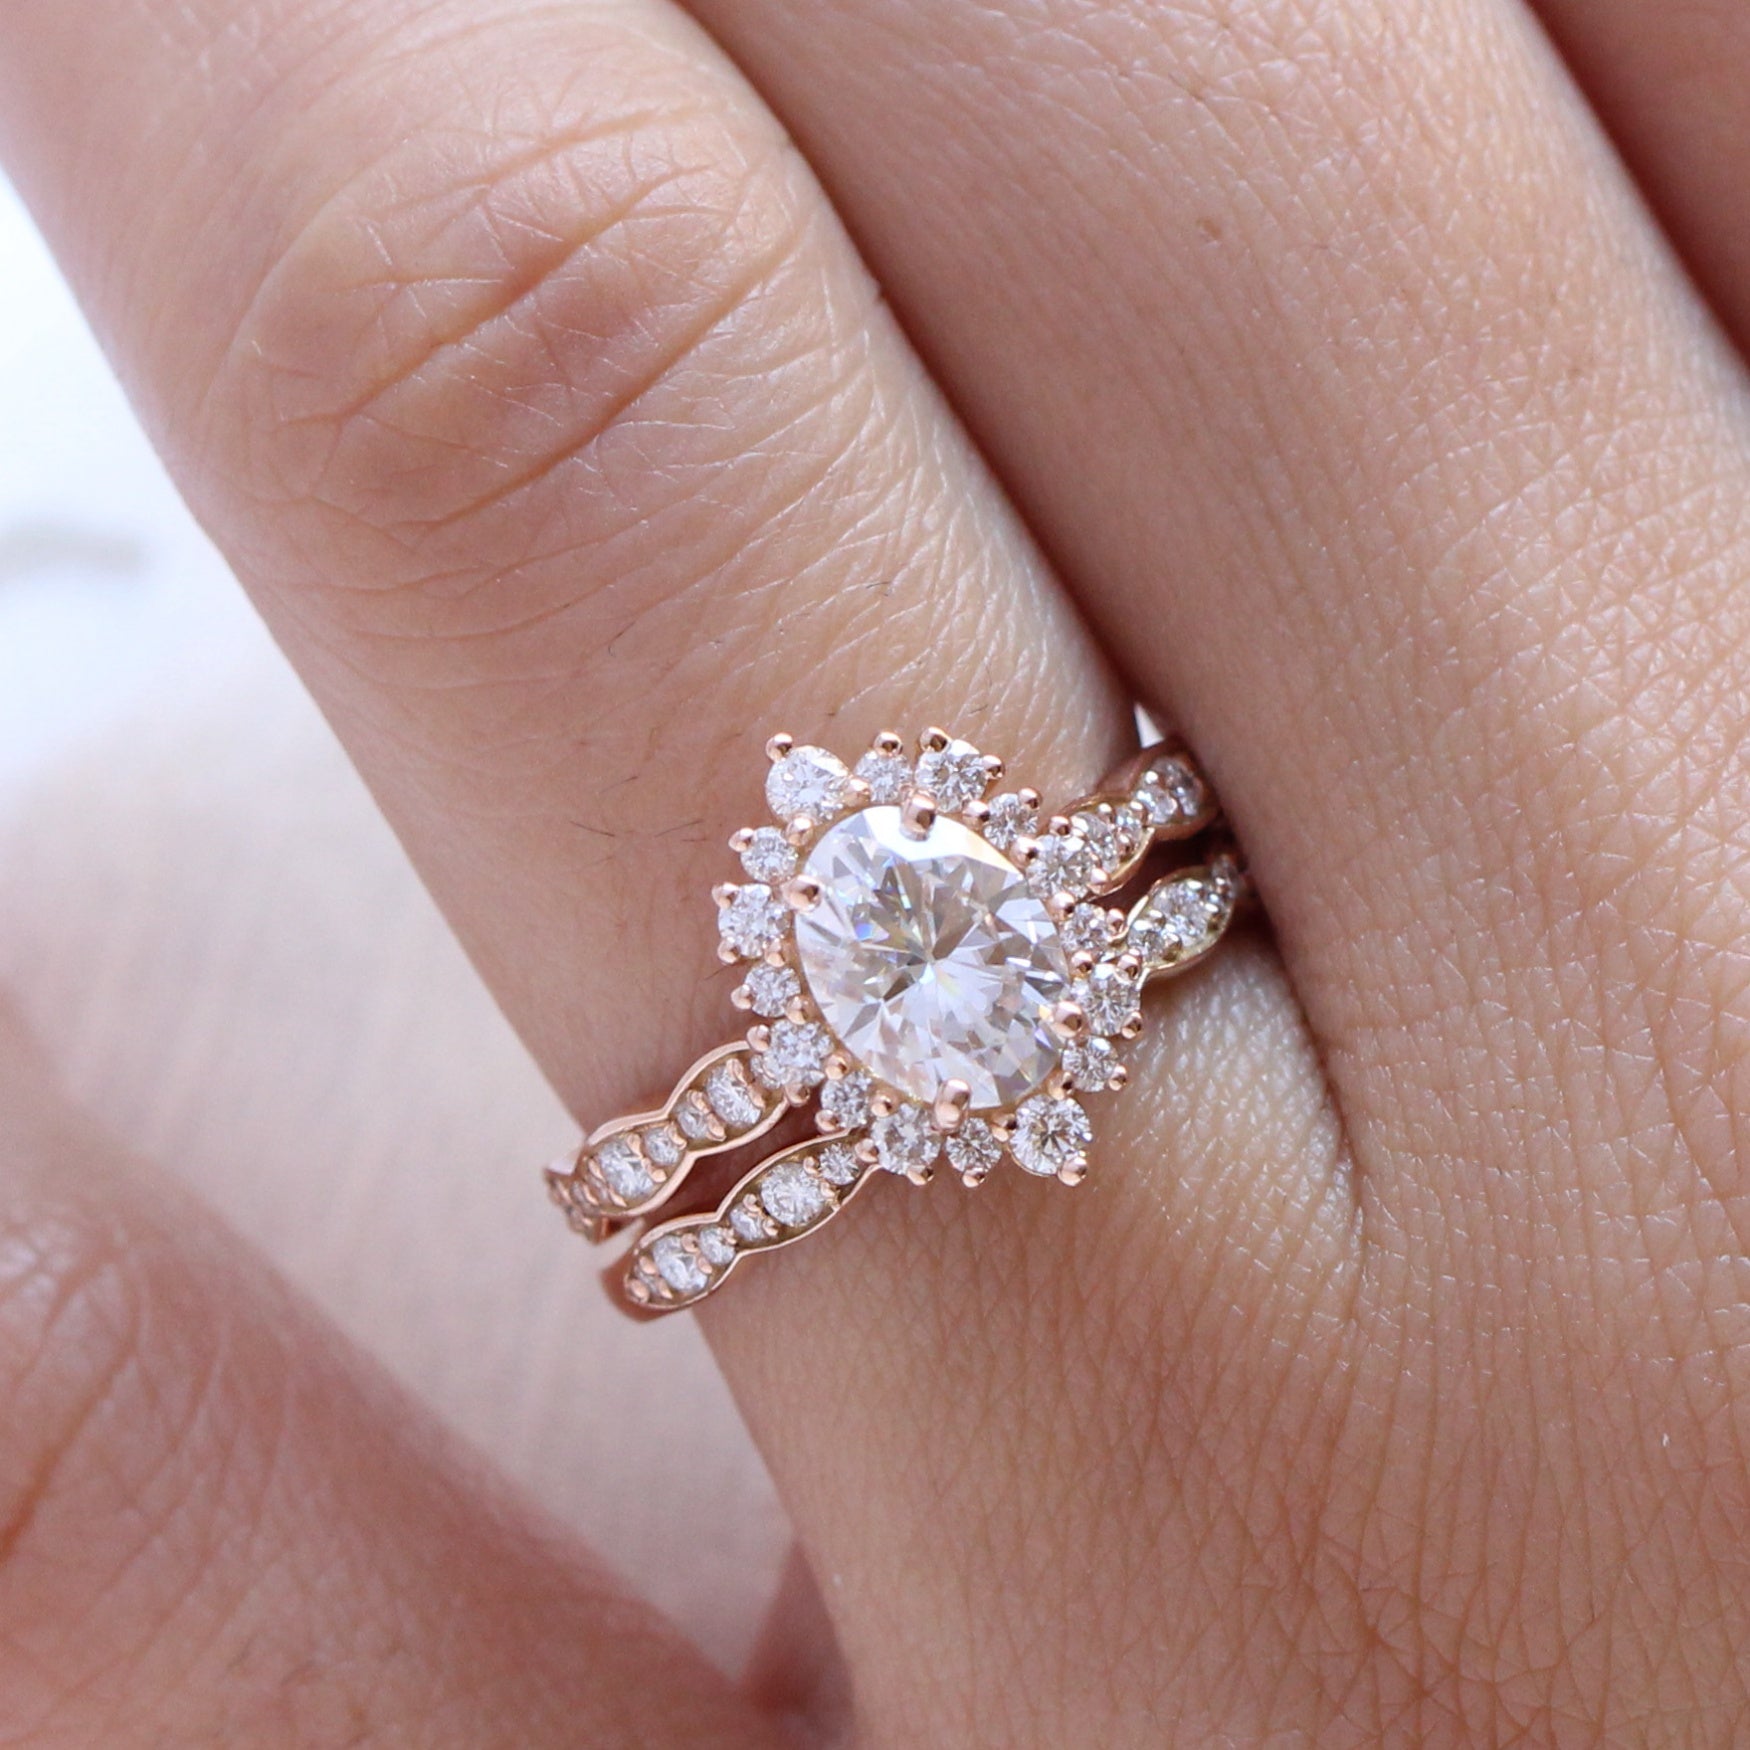 Tiara Halo Oval Engagement Ring w/ Moissanite and Diamond in Scalloped Band